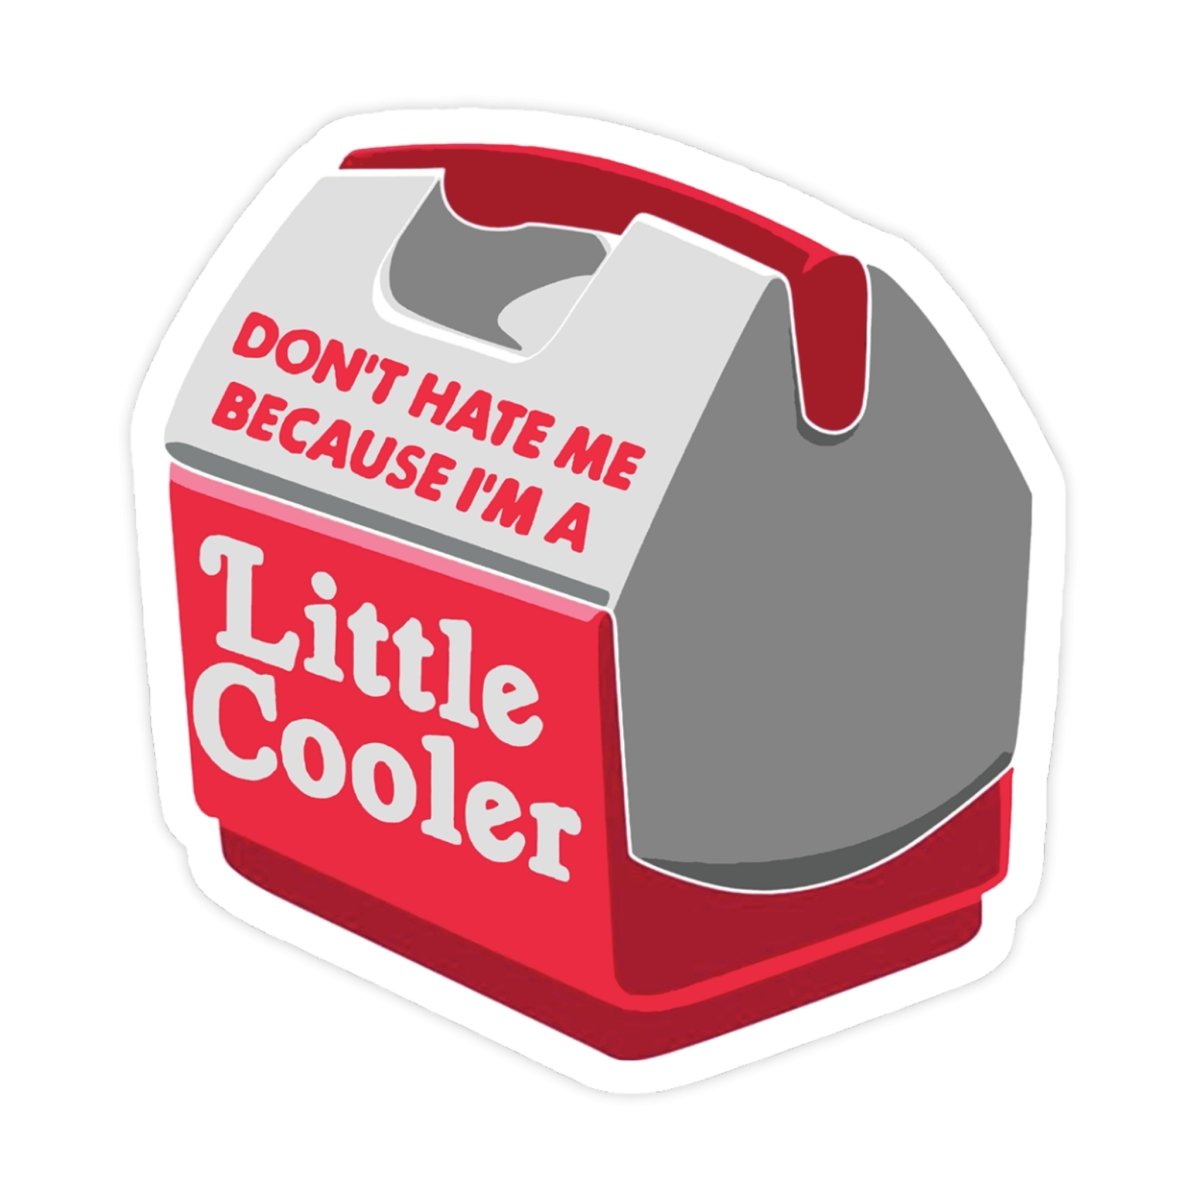 Don't Hate Me Because I'm A Little Cooler Meme Sticker - stickerbullDon't Hate Me Because I'm A Little Cooler Meme StickerRetail StickerstickerbullstickerbullTaylorLittleCooler_#6Don't Hate Me Because I'm A Little Cooler Meme Sticker